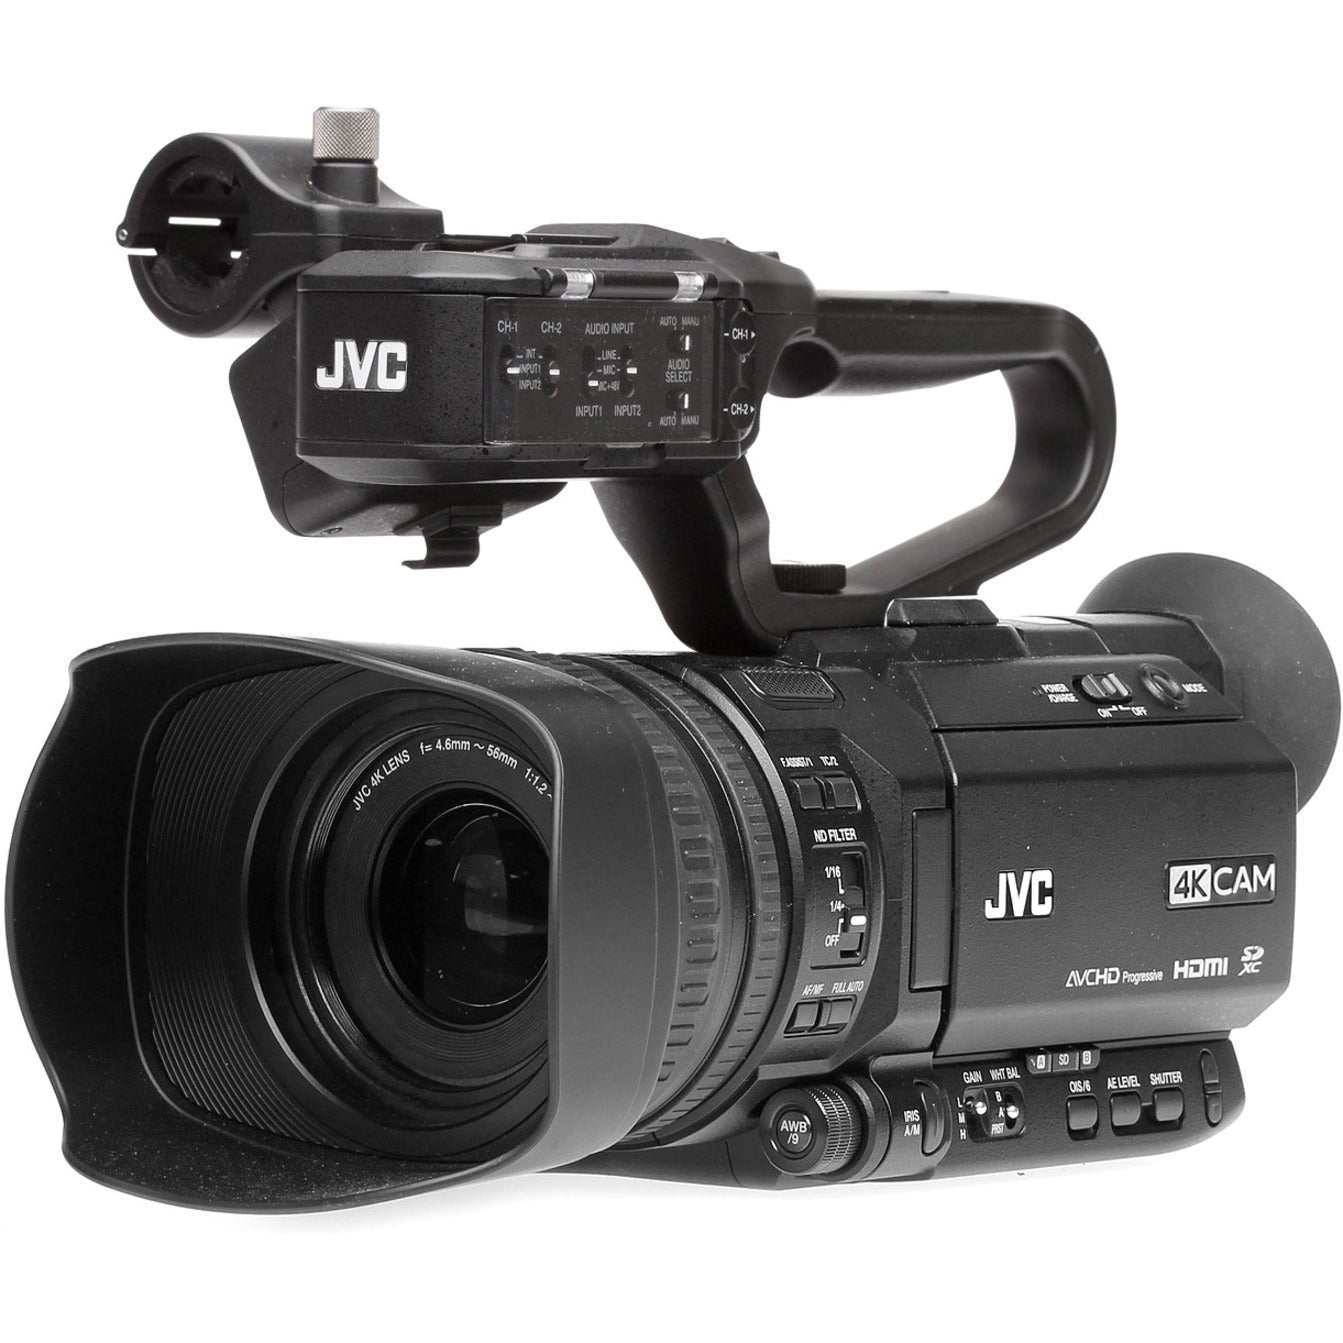 JVC GY-HM250U 4KCAM Compact Handheld Camcorder w/Integrated 12x Lens, 3.5" LCD Screen, Optical Image Stabilization